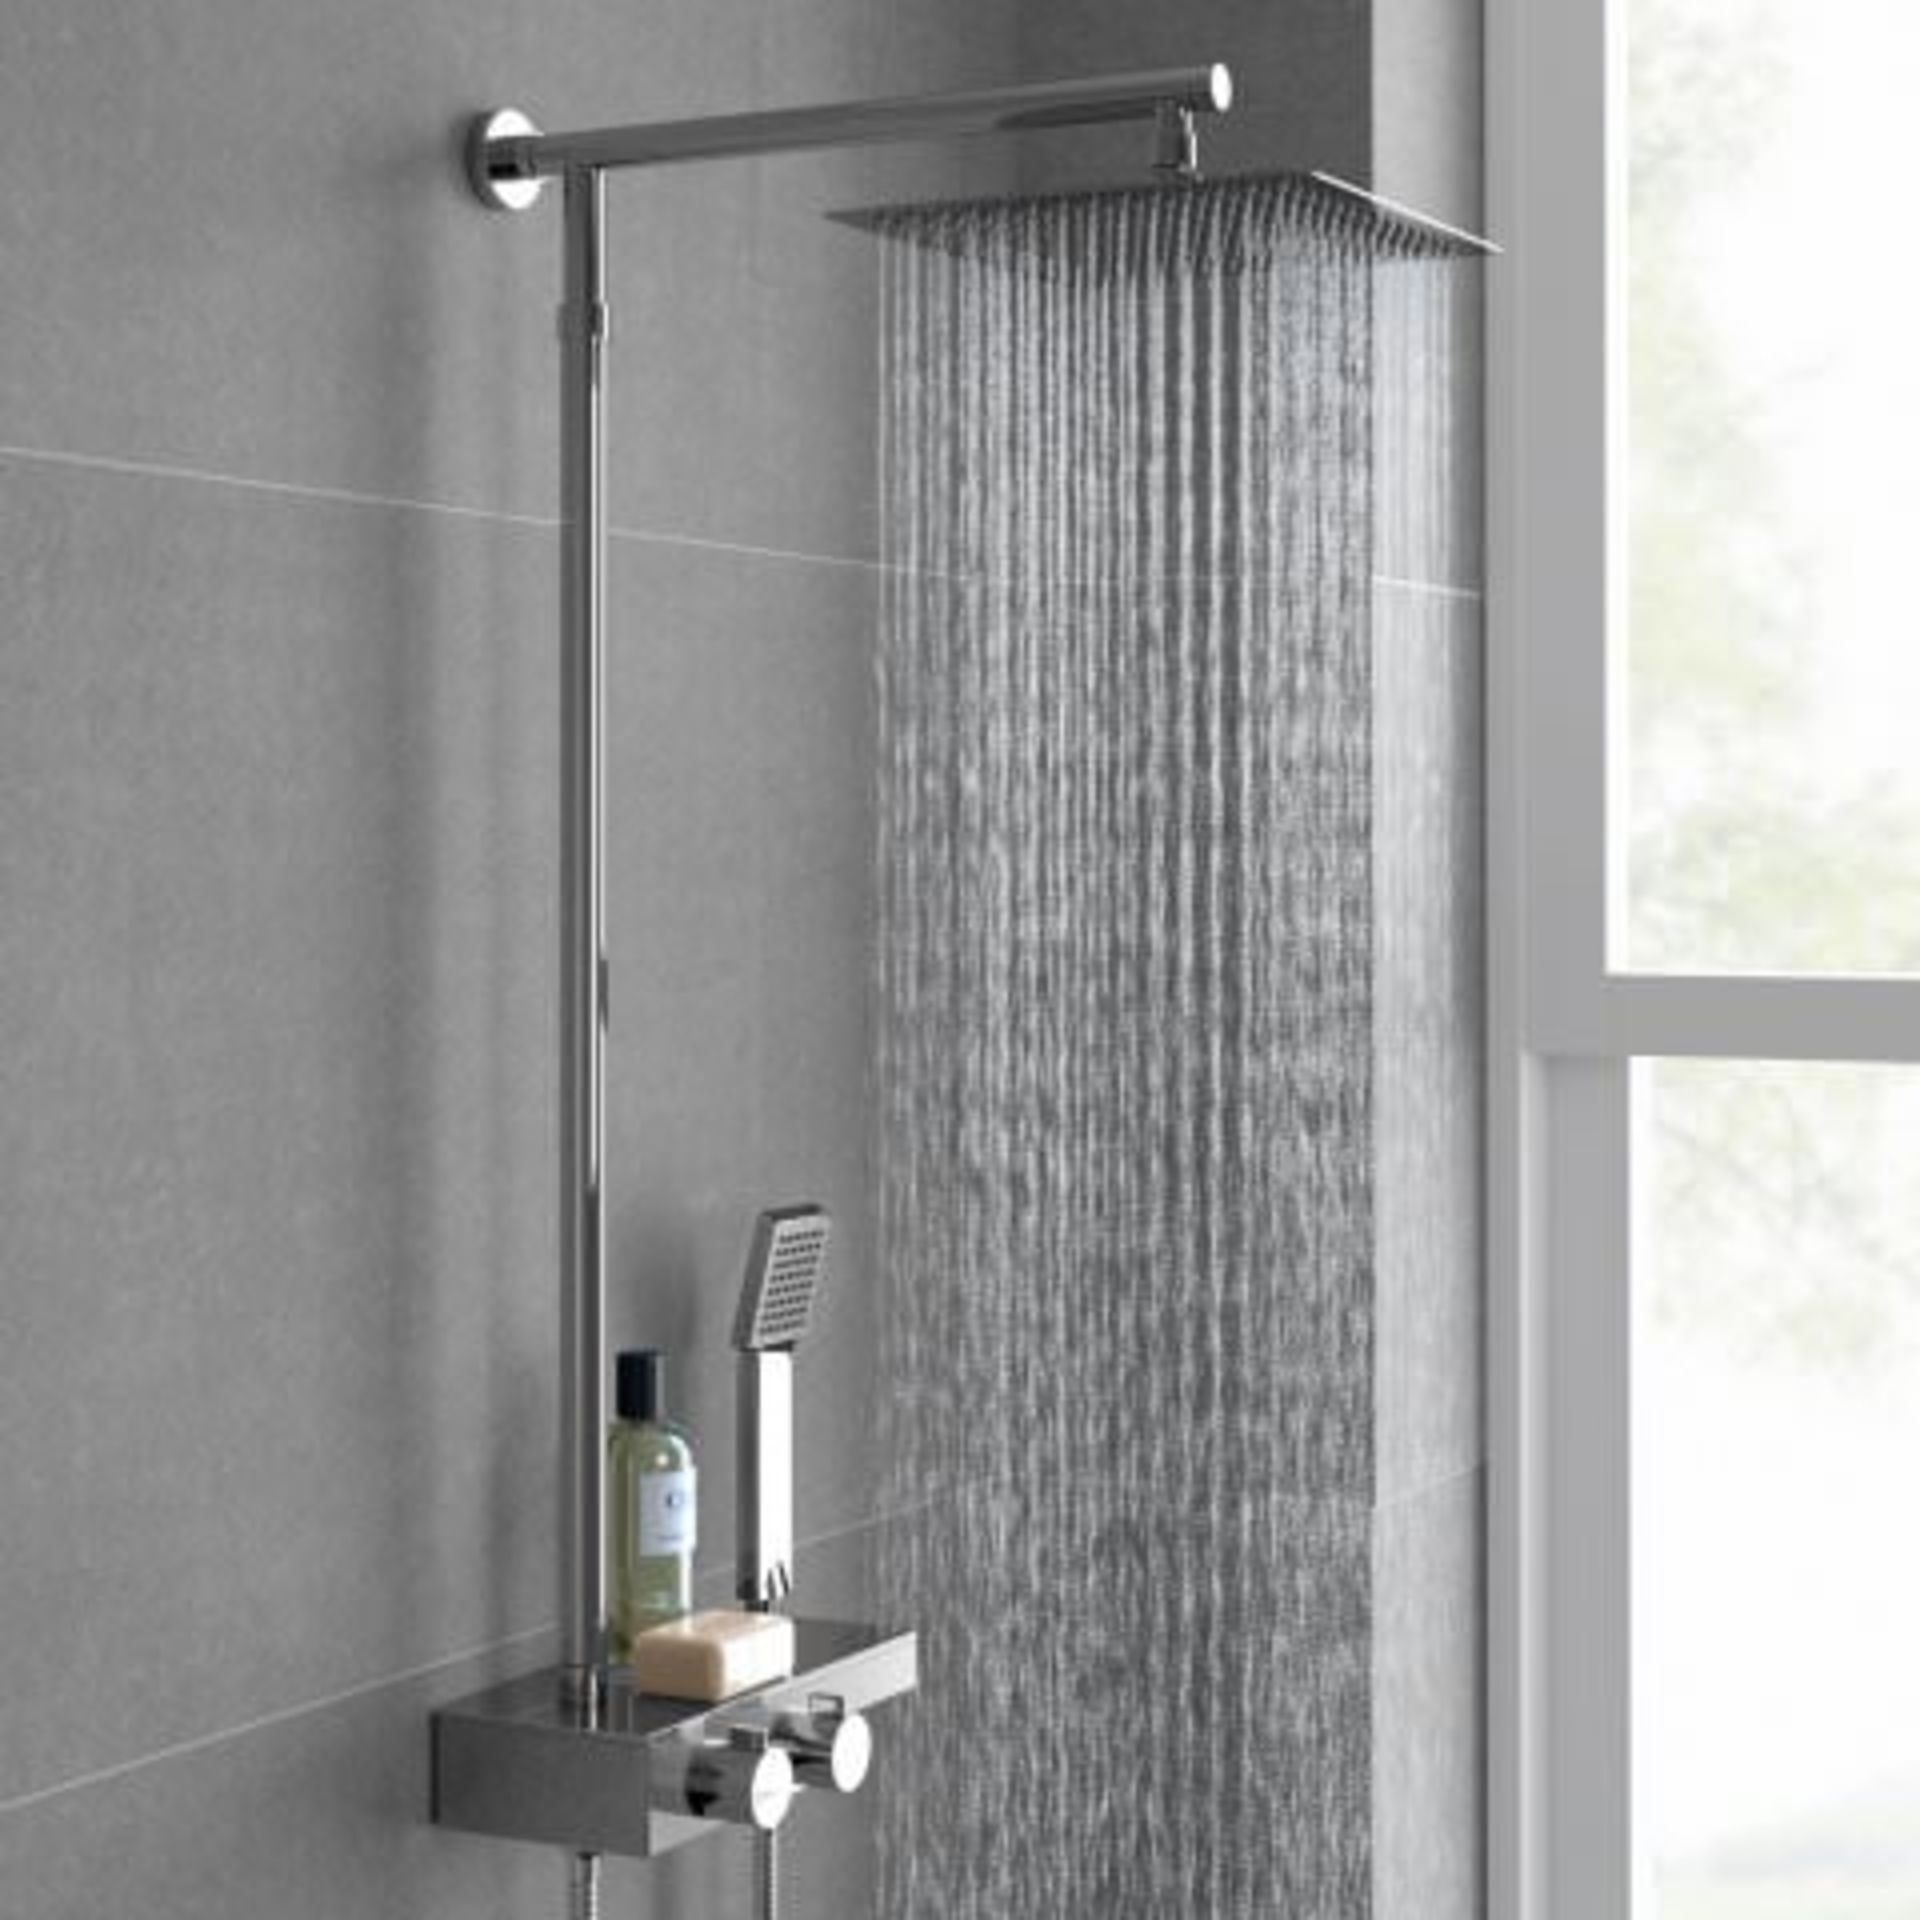 (J15) Thermostatic Exposed Shower Kit 250mm Square Head Handheld. RRP £349.99. Designer Style Our